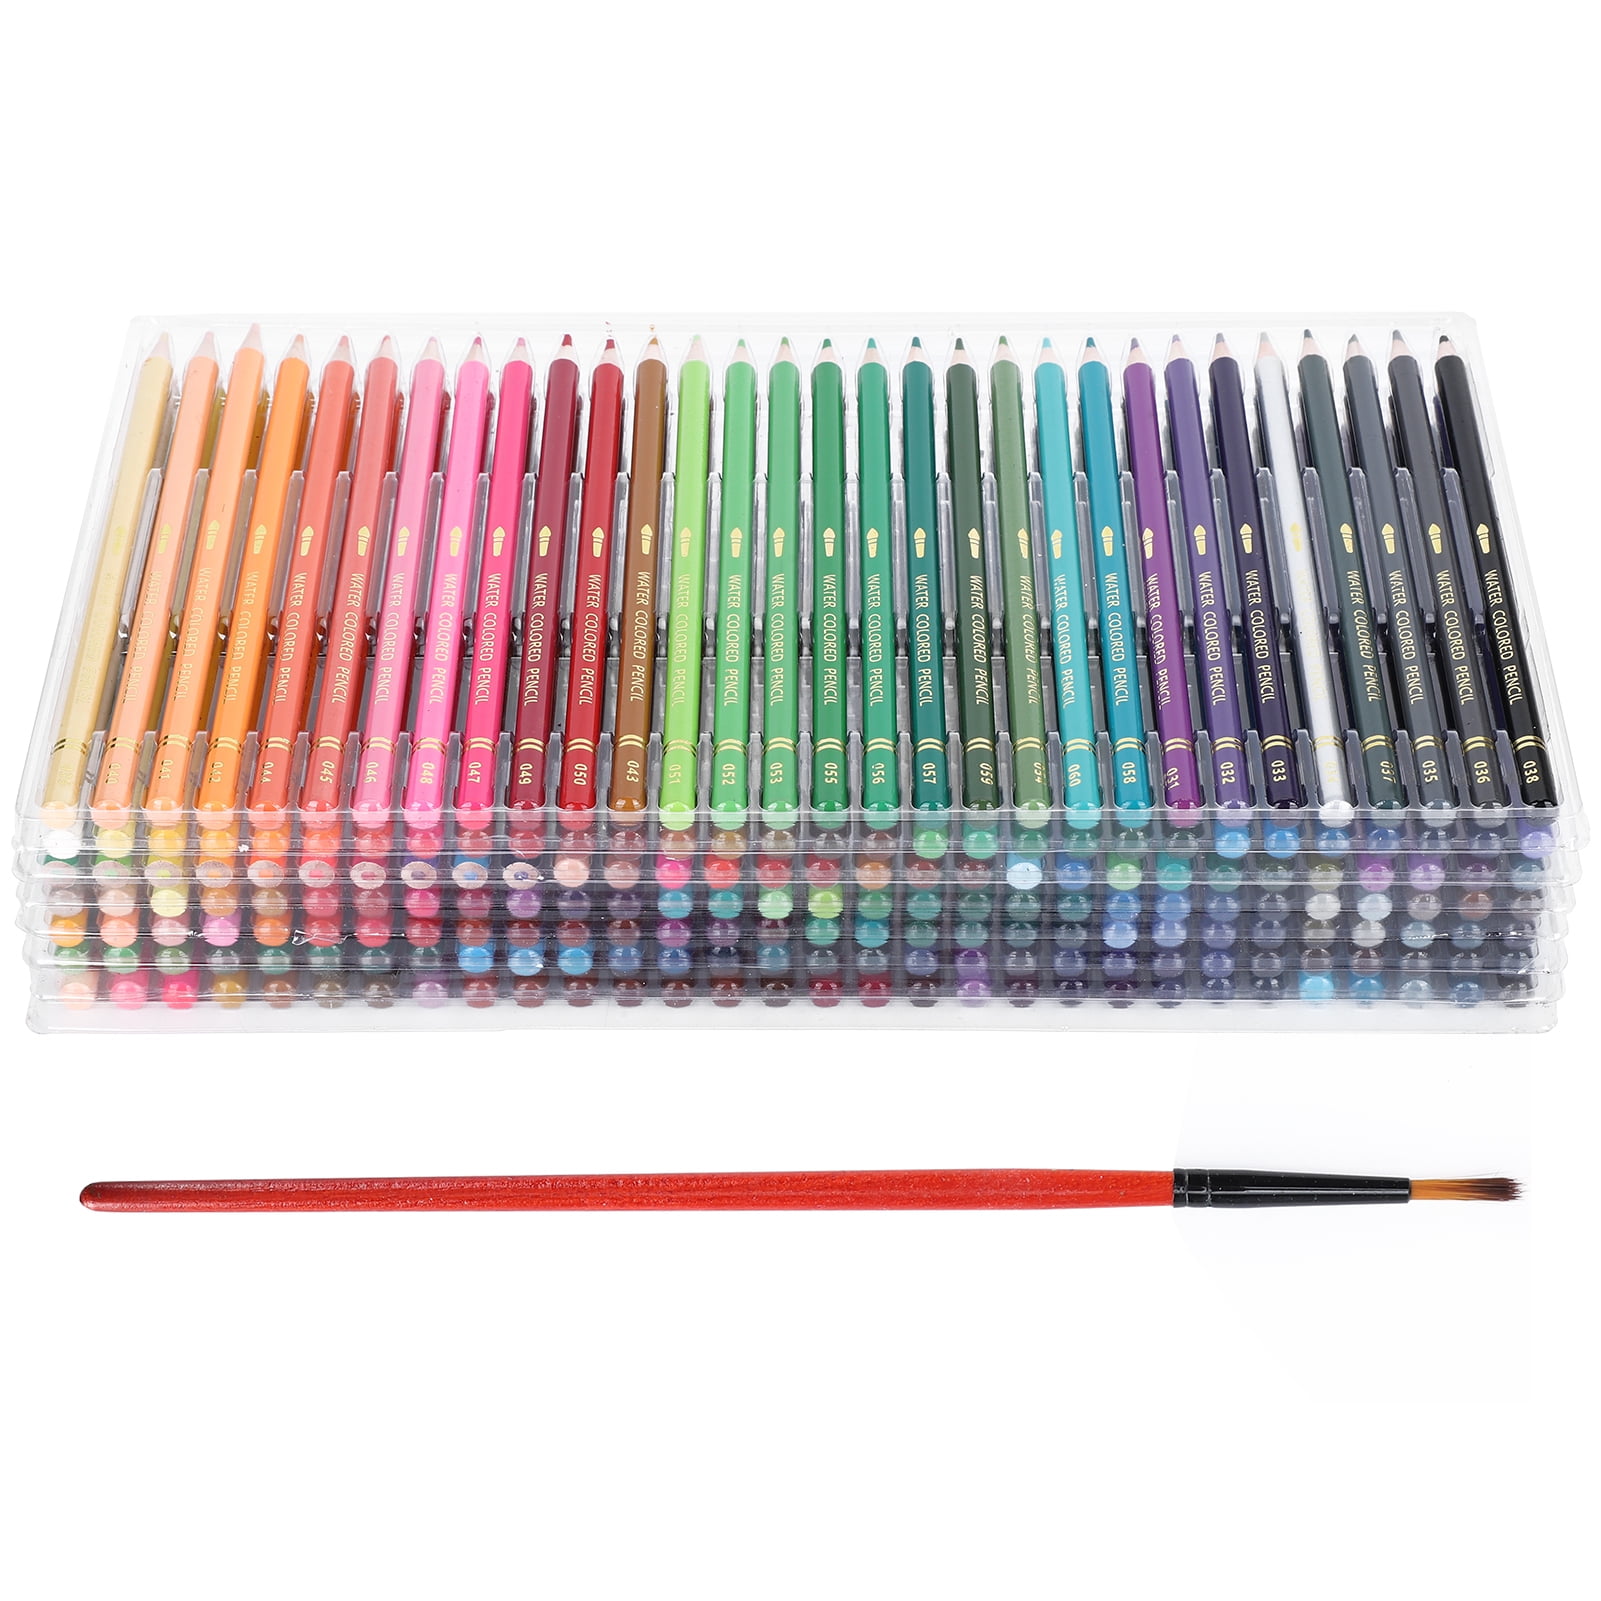 Zunate 210 Colors Water‑Soluble Core Pencils Set Portable Lightweight Pencils Set Art Drawing Graffiti Tools Suitable as 